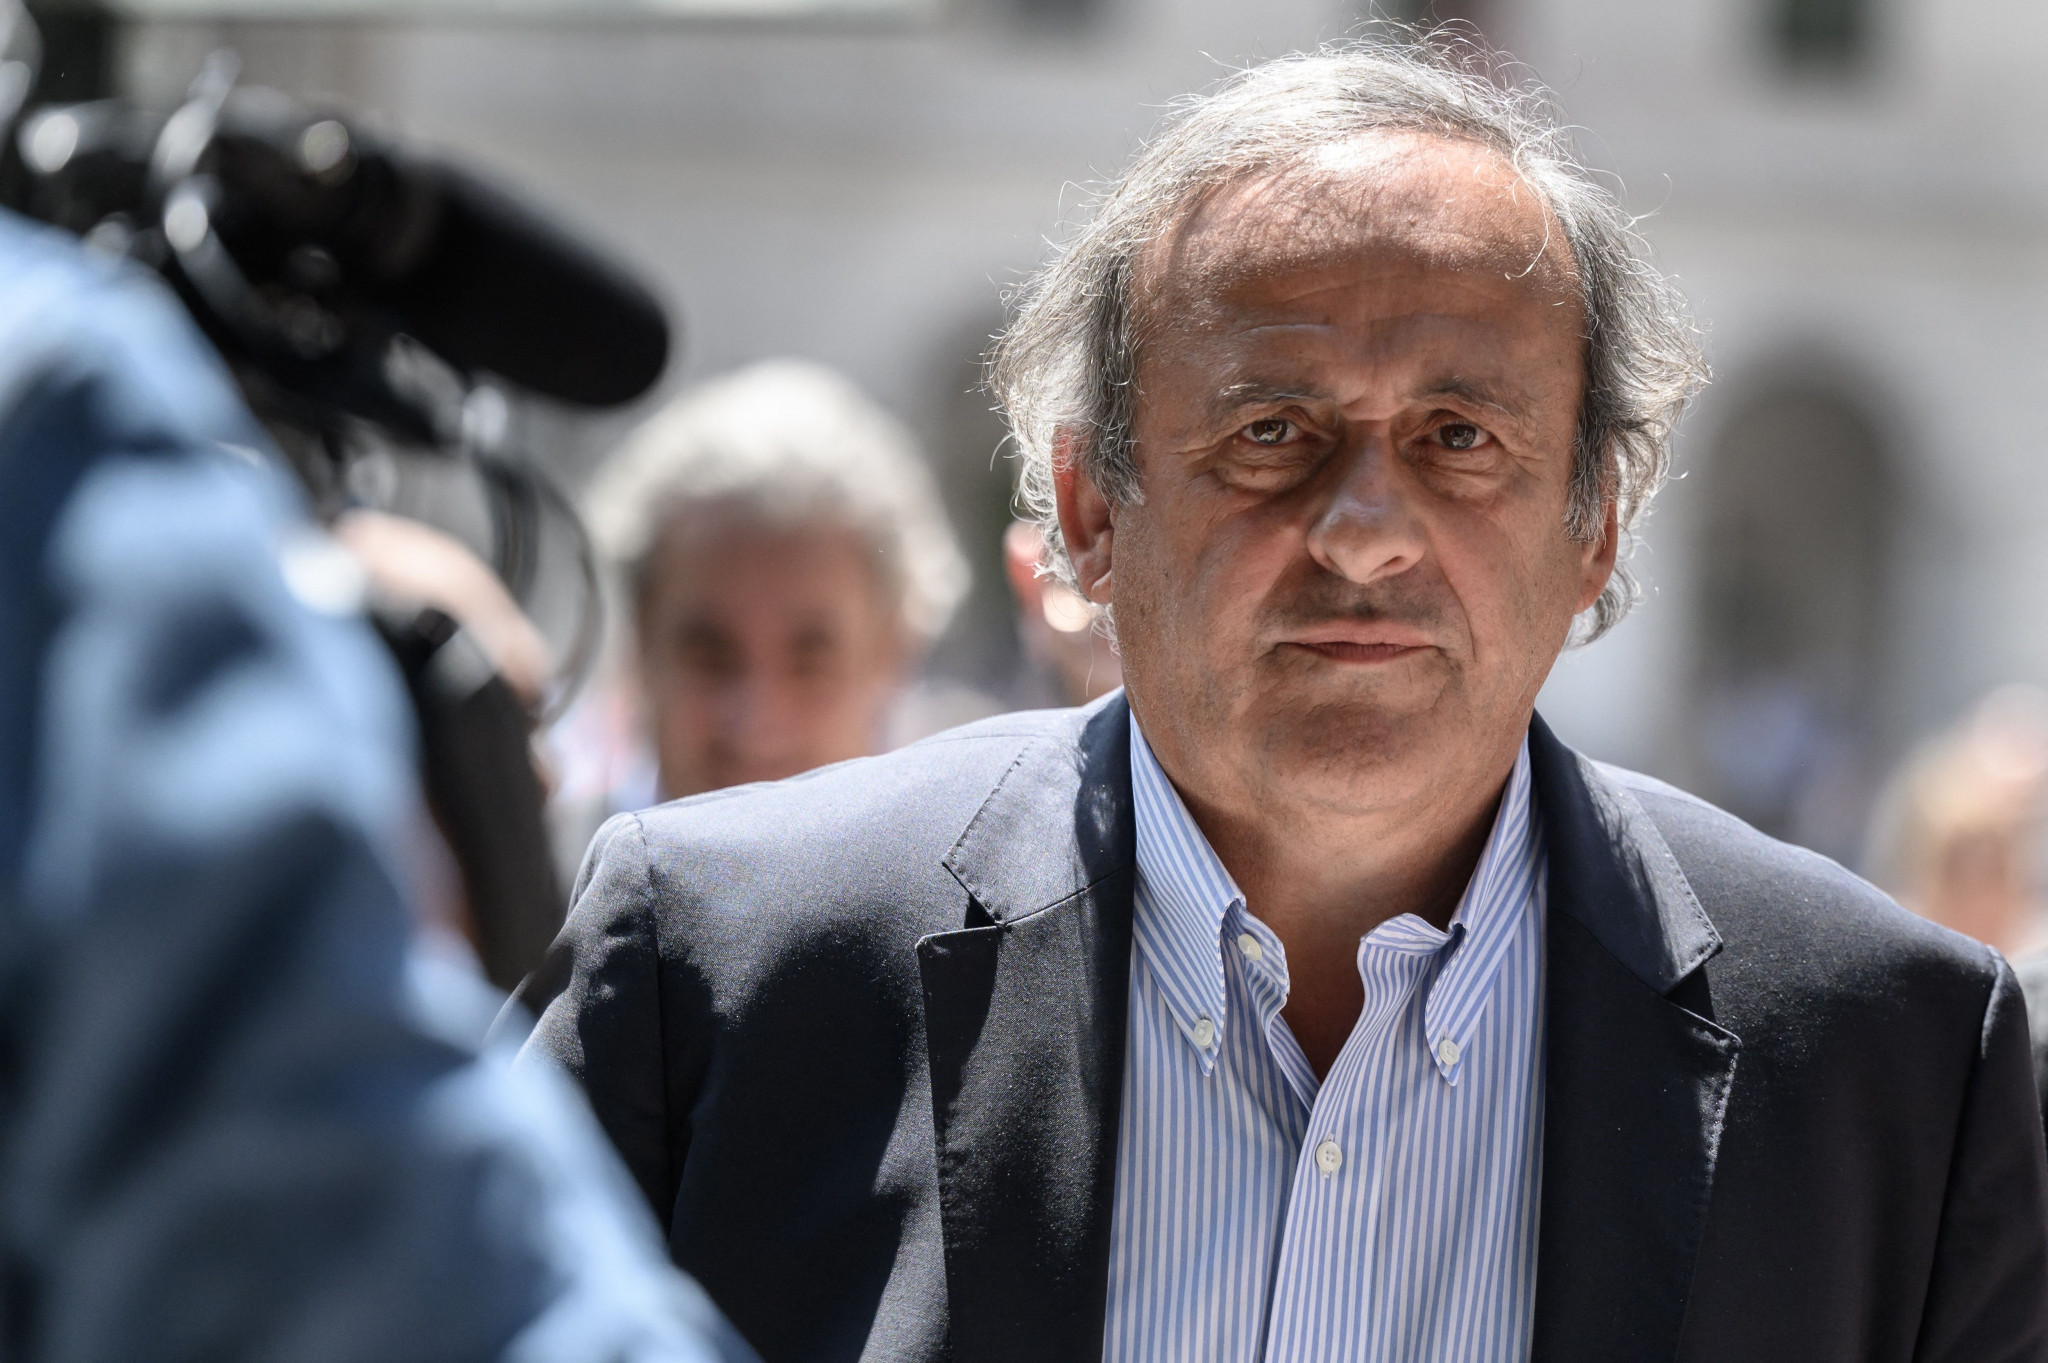 Platini confident "justice" will prevail as lawyer calls for acquittal in fraud trial